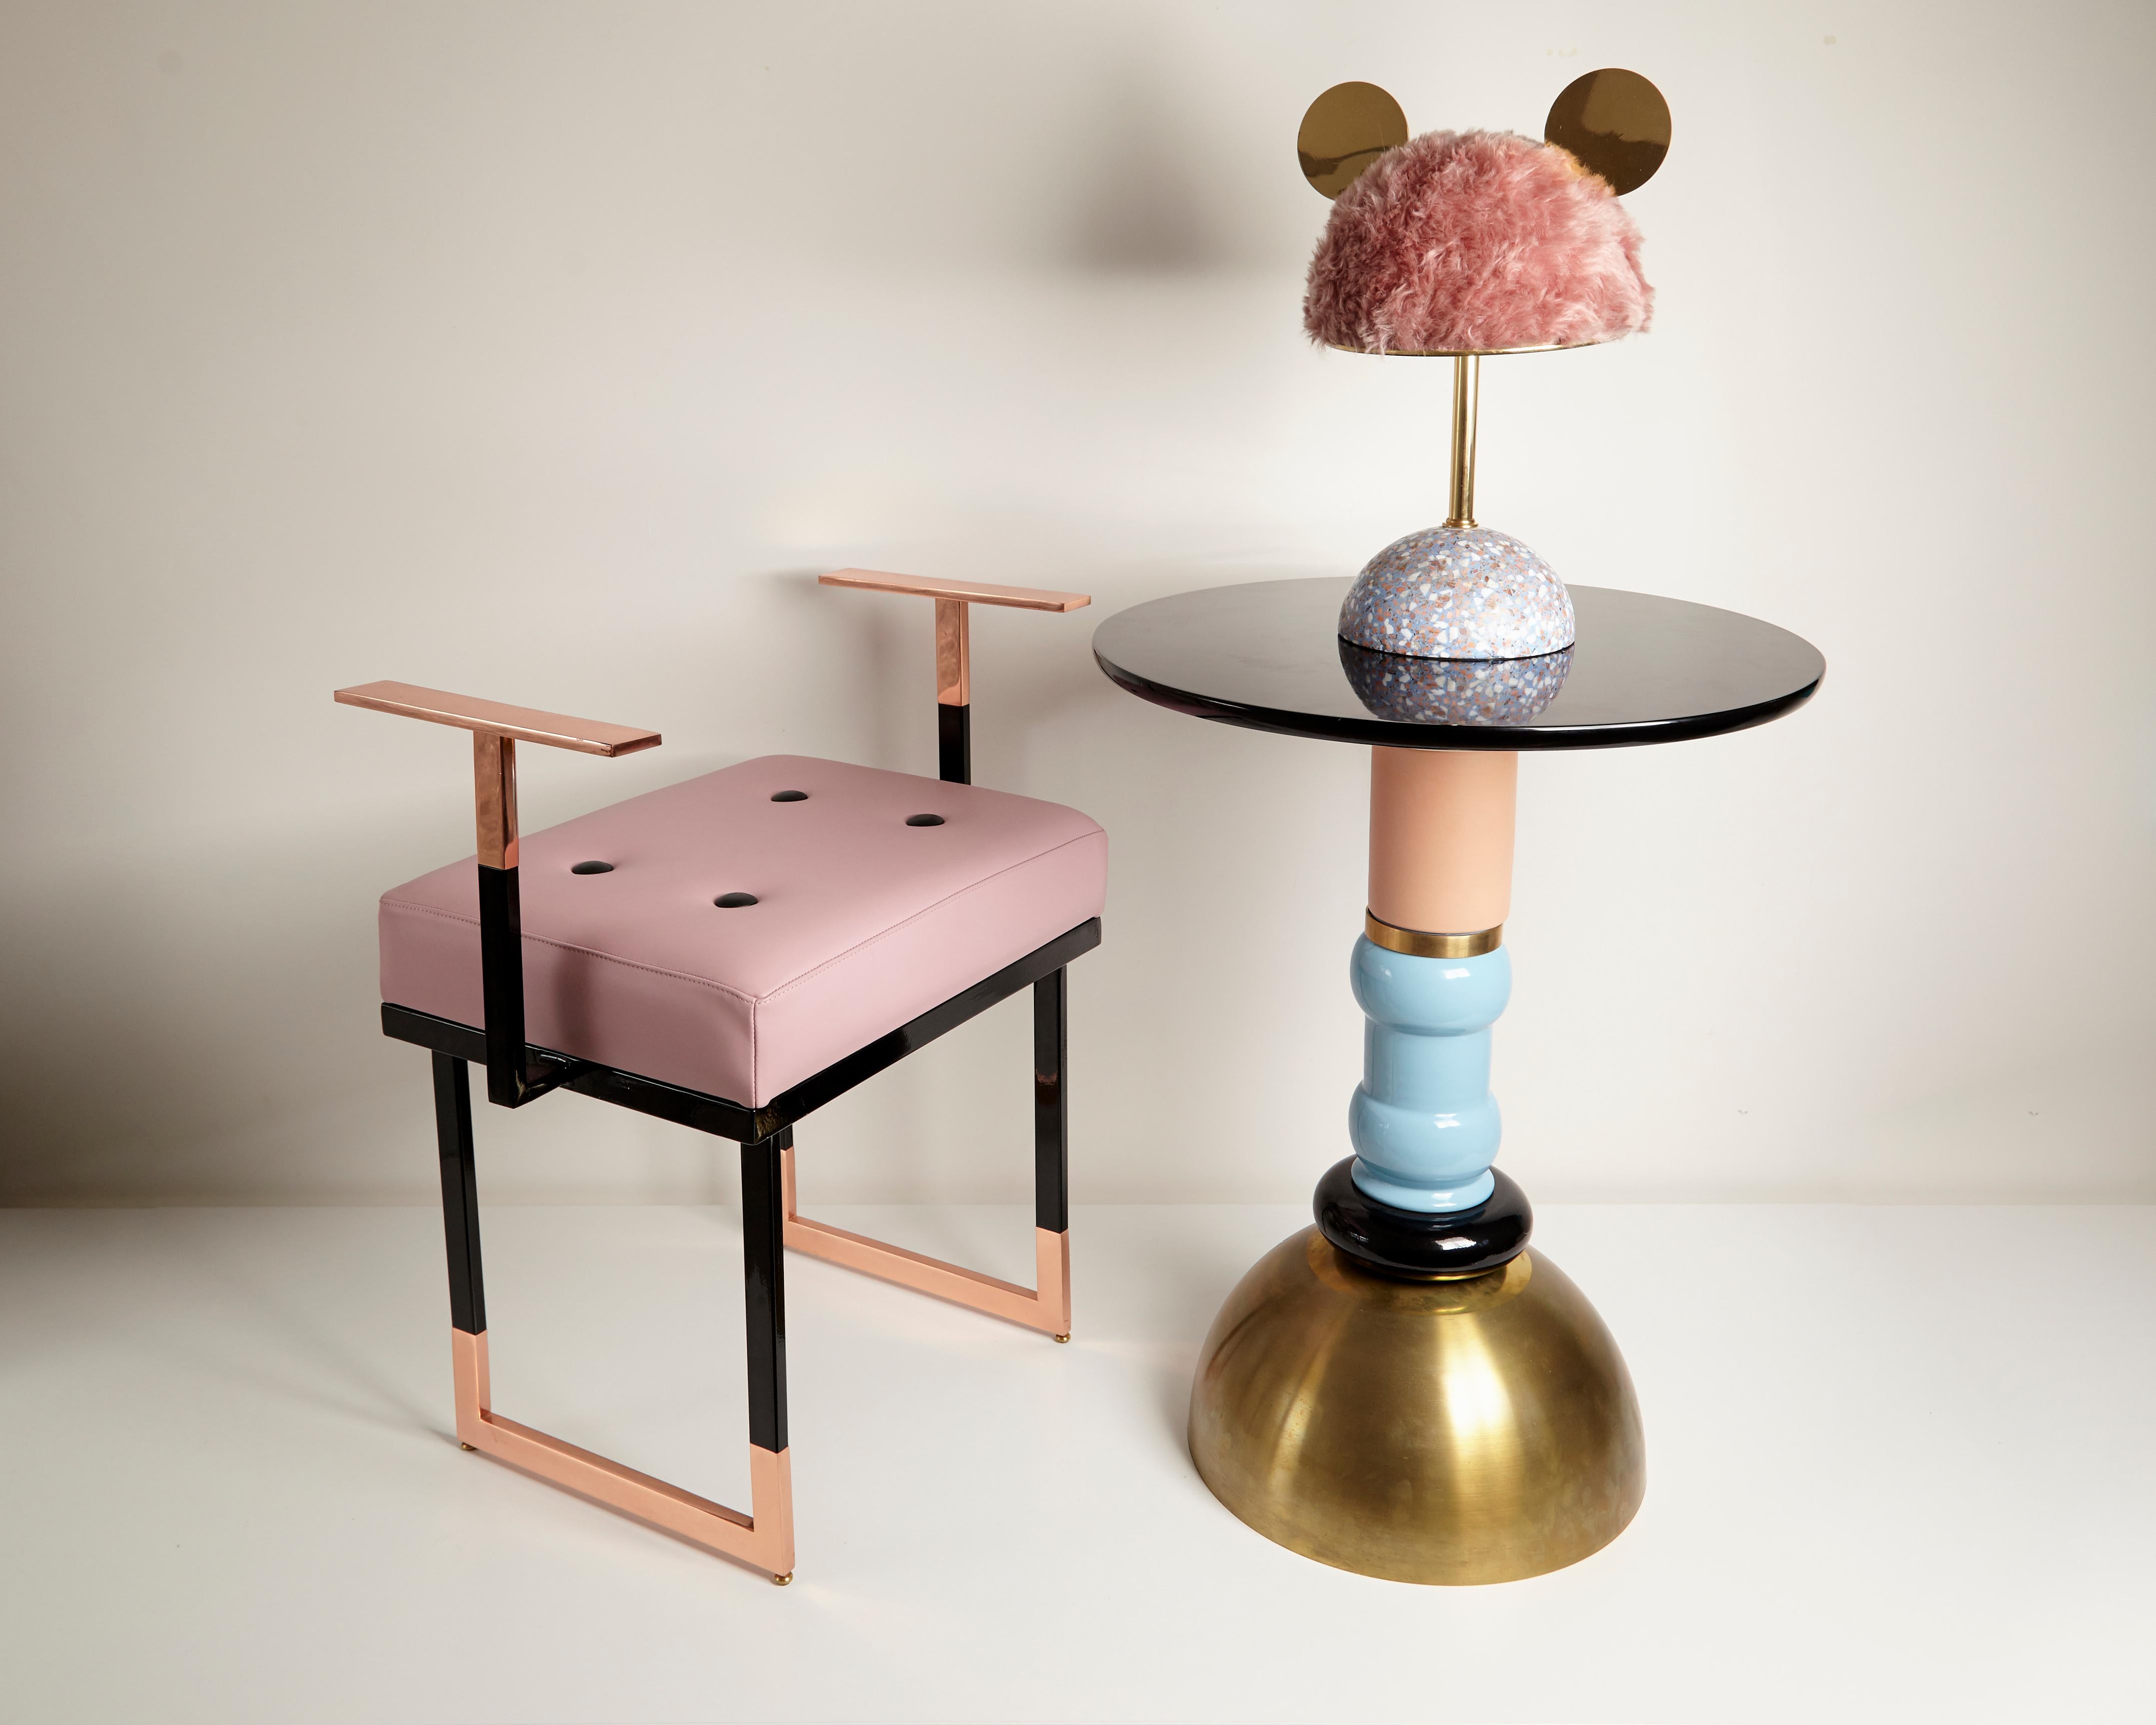 TOTEM Table in Brass, Wood and Ceramic, Handmade in Italy For Sale 2